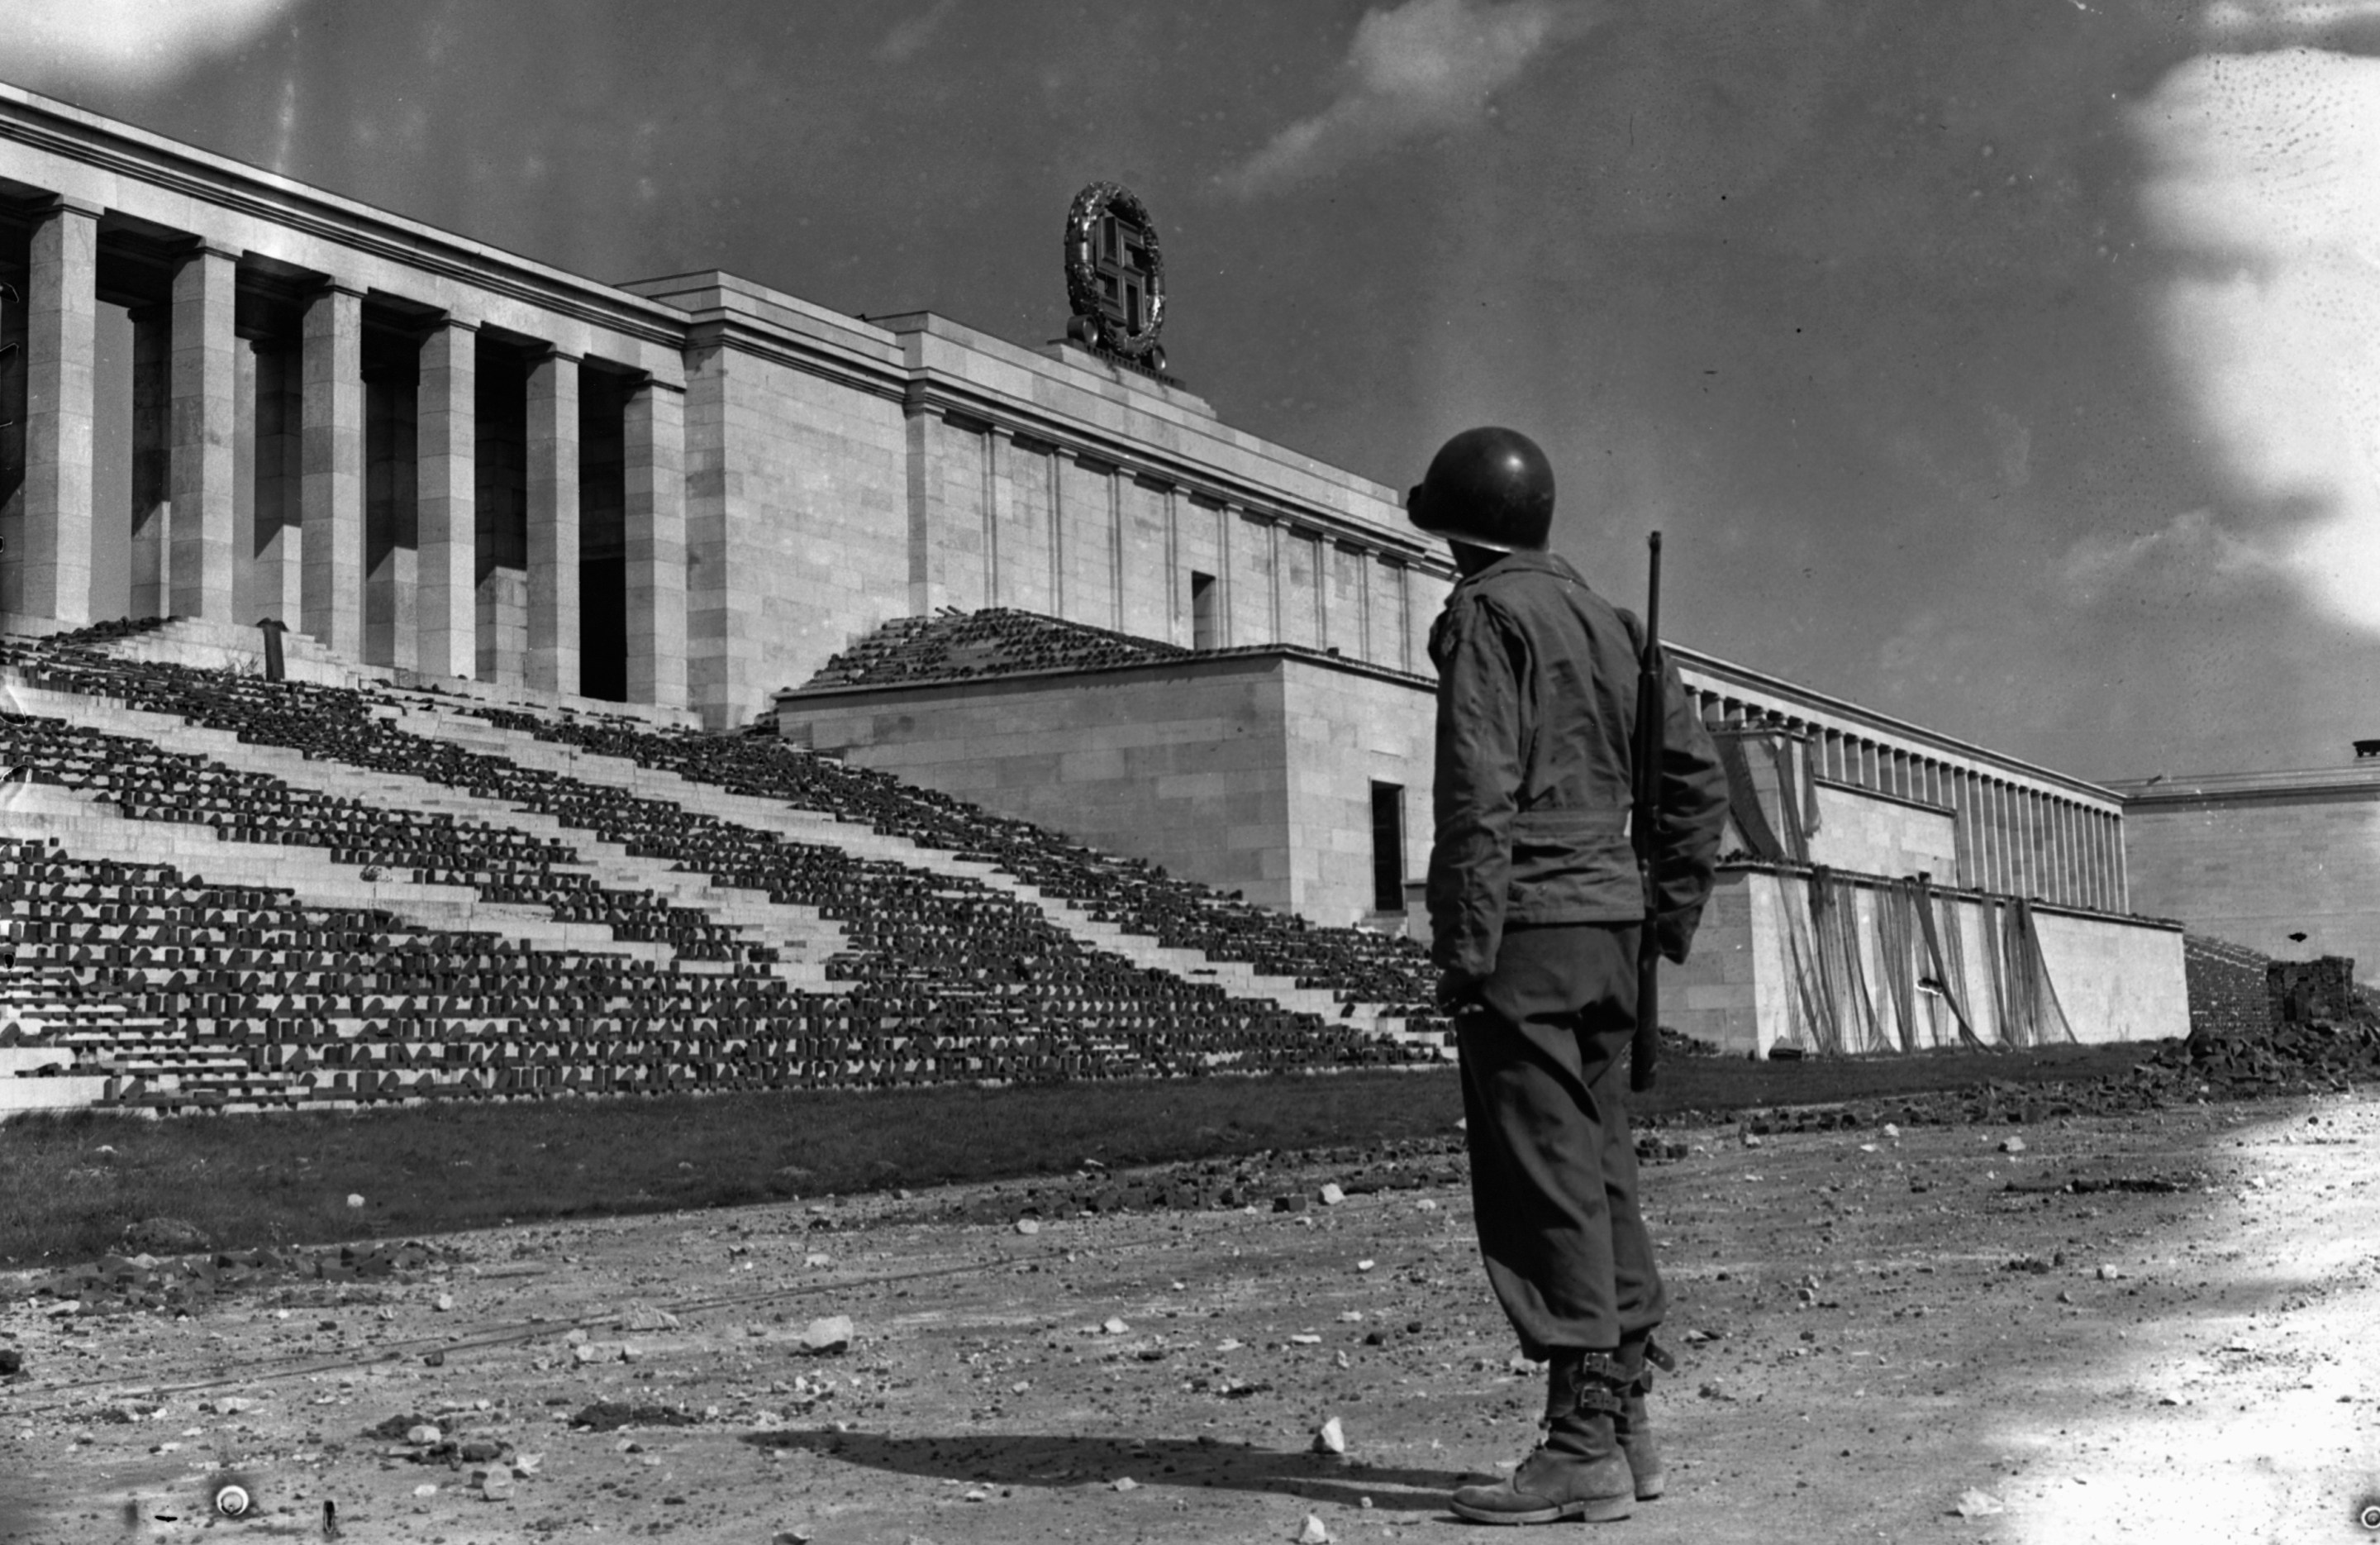 An American soldier stands in the Zeppelin stadium and looks towards a Nazi swastika, Nuremberg, Germany, 1945. The stadium, along with two others, was used by Adolf Hitler to hold many Nazi rallies. (Photo by © Hulton-Deutsch Collection/CORBIS/Corbis via Getty Images)